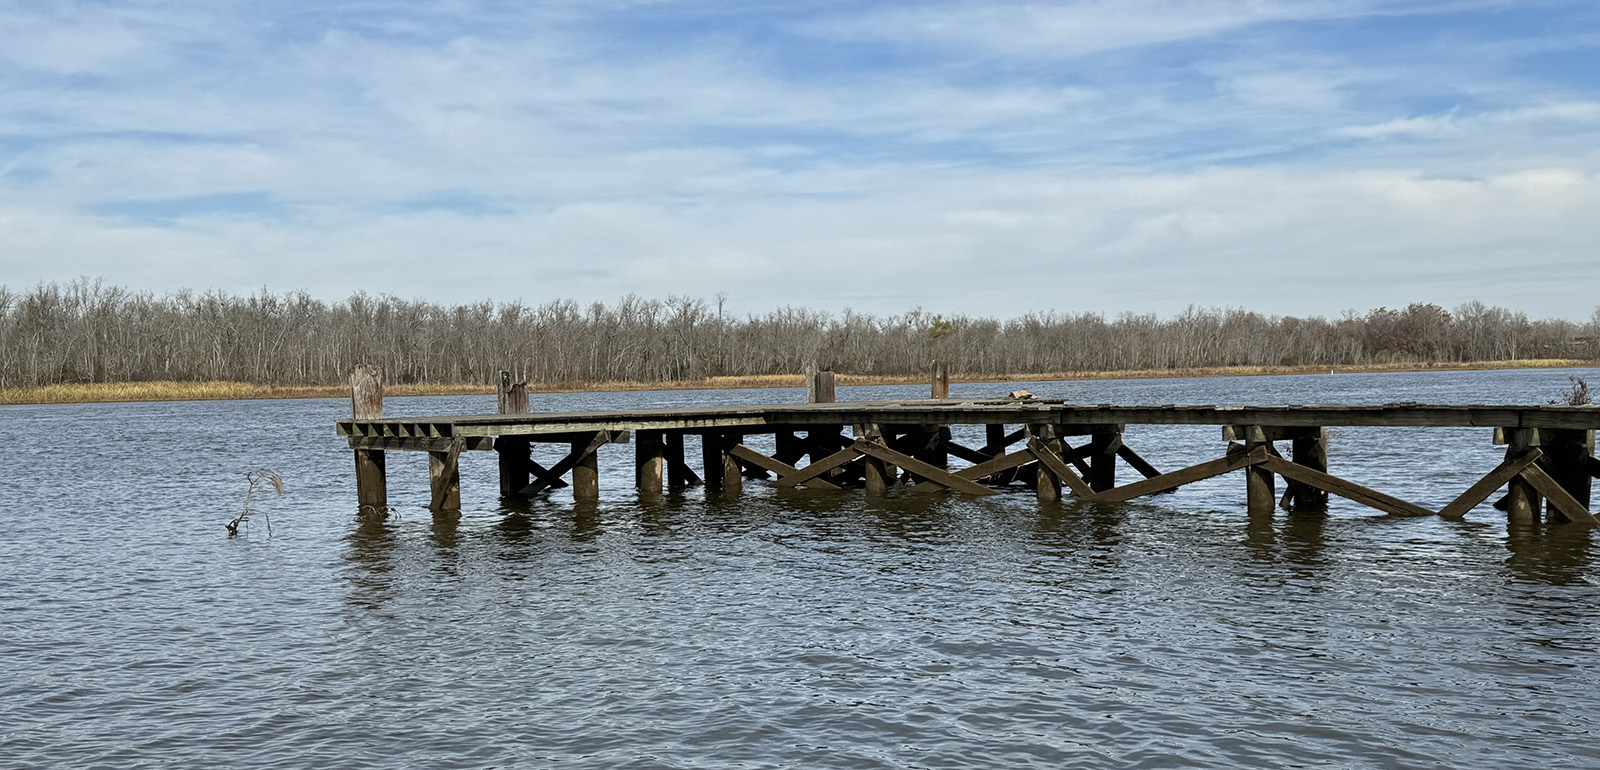 A photo of a large wooden dock set in a river.